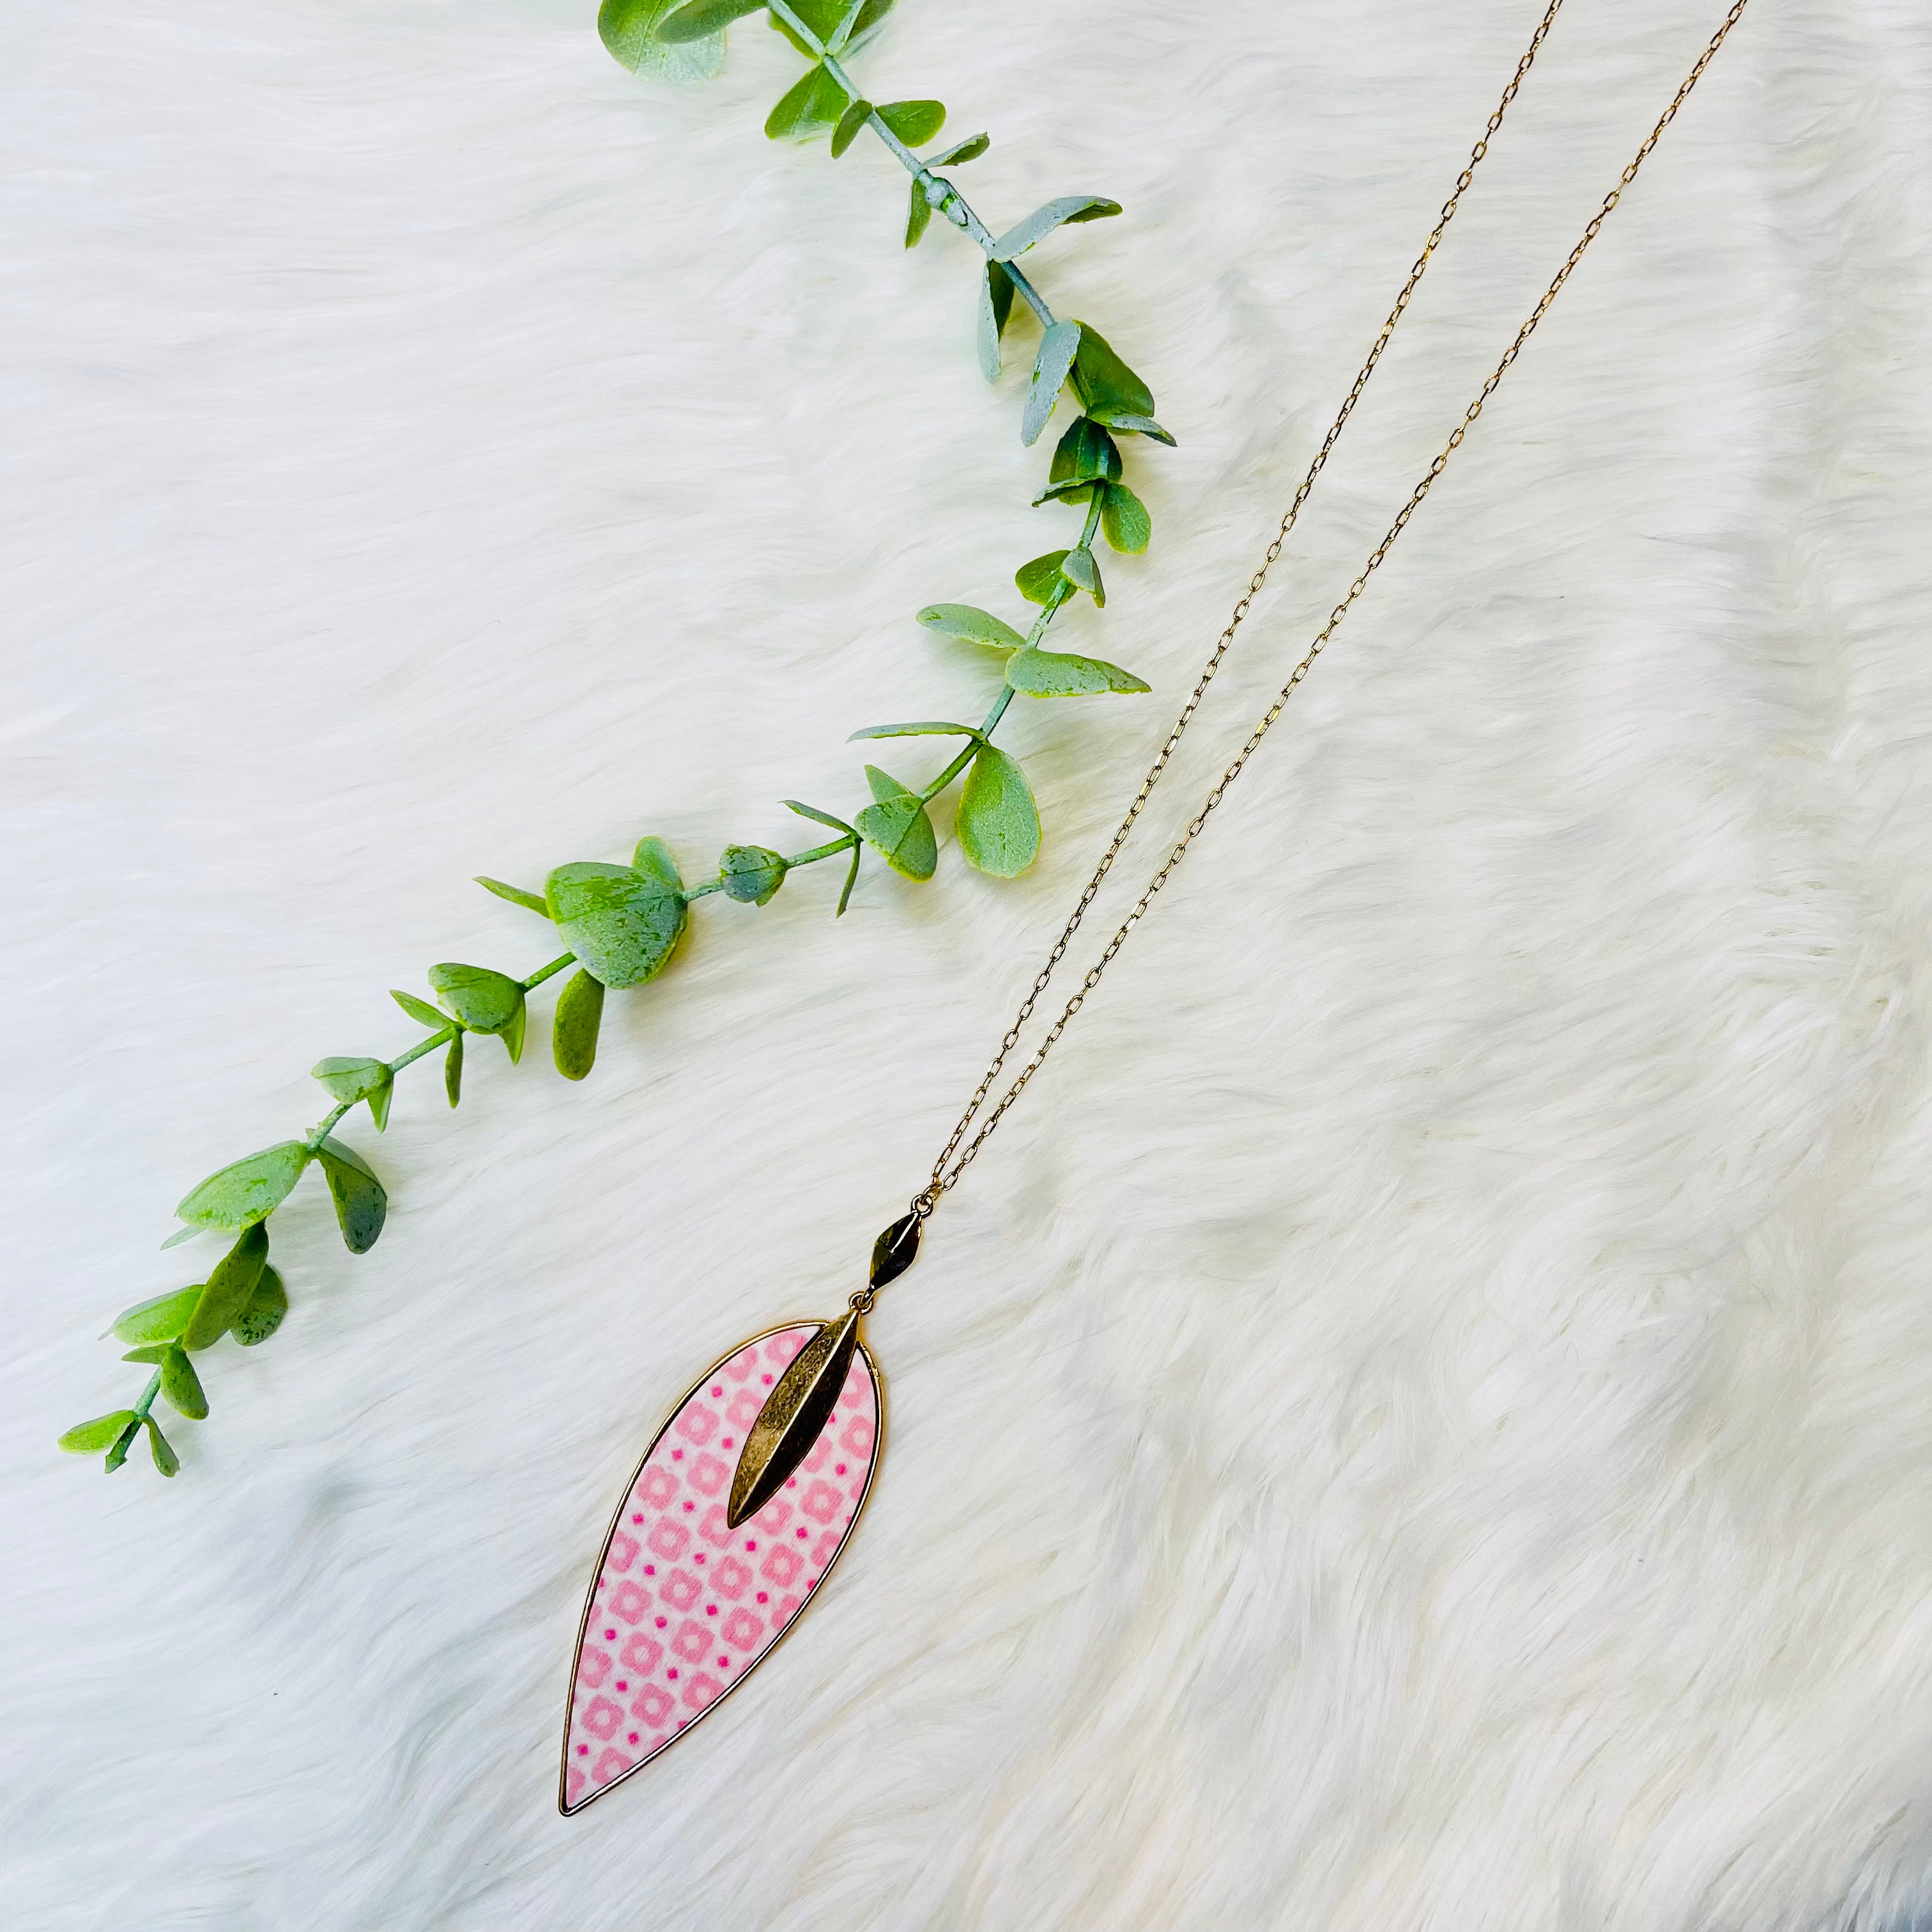 Patterned Textured Wood Diamond Necklace